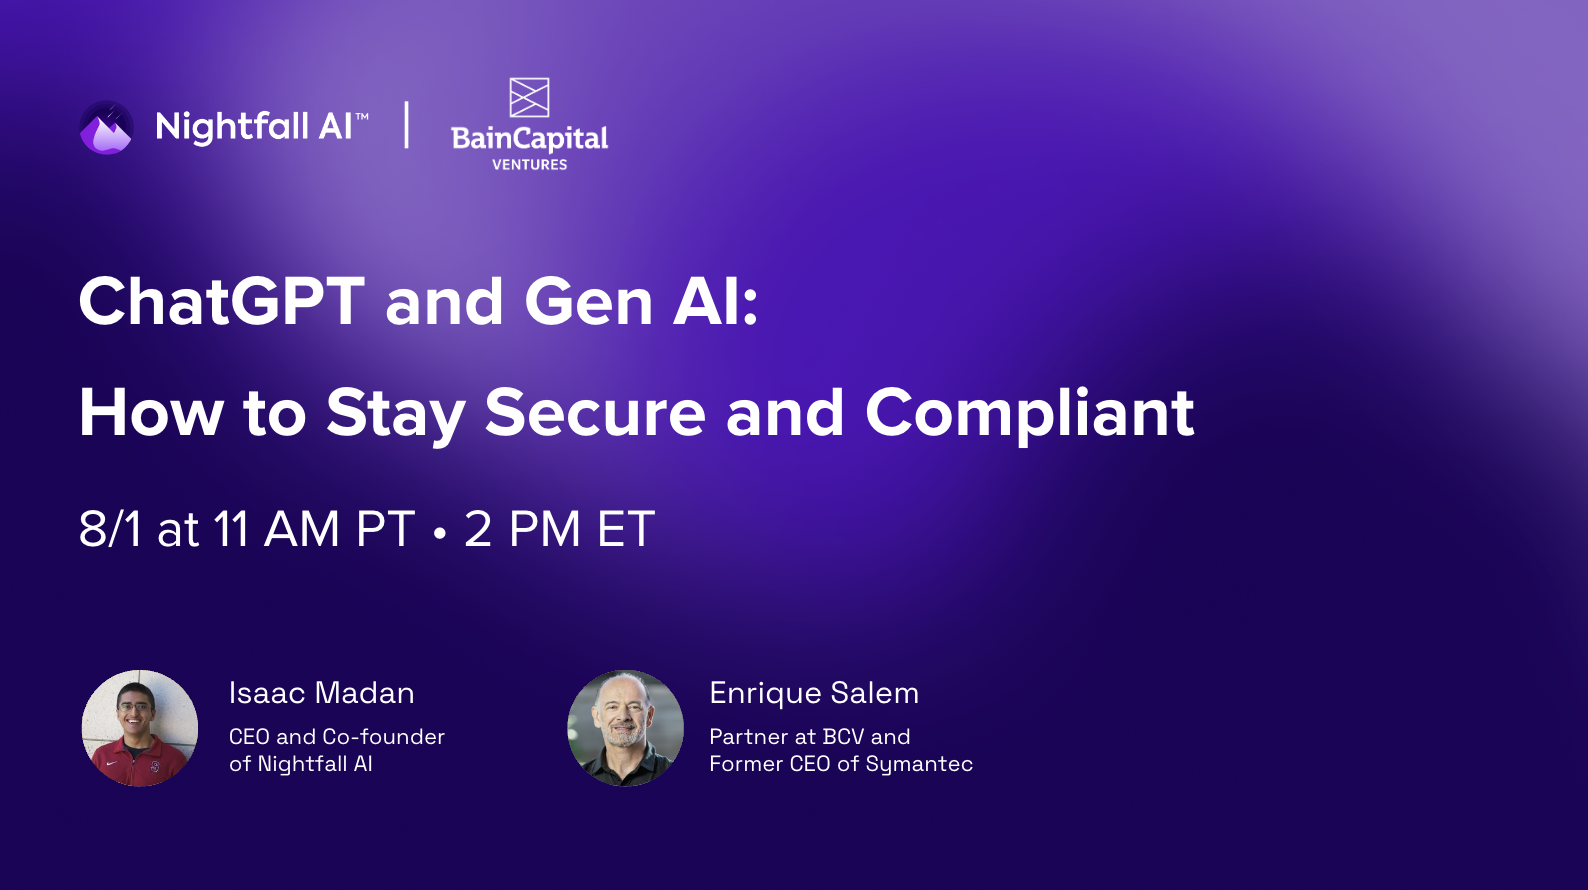 ChatGPT and Gen AI: How to Stay Secure and Compliant